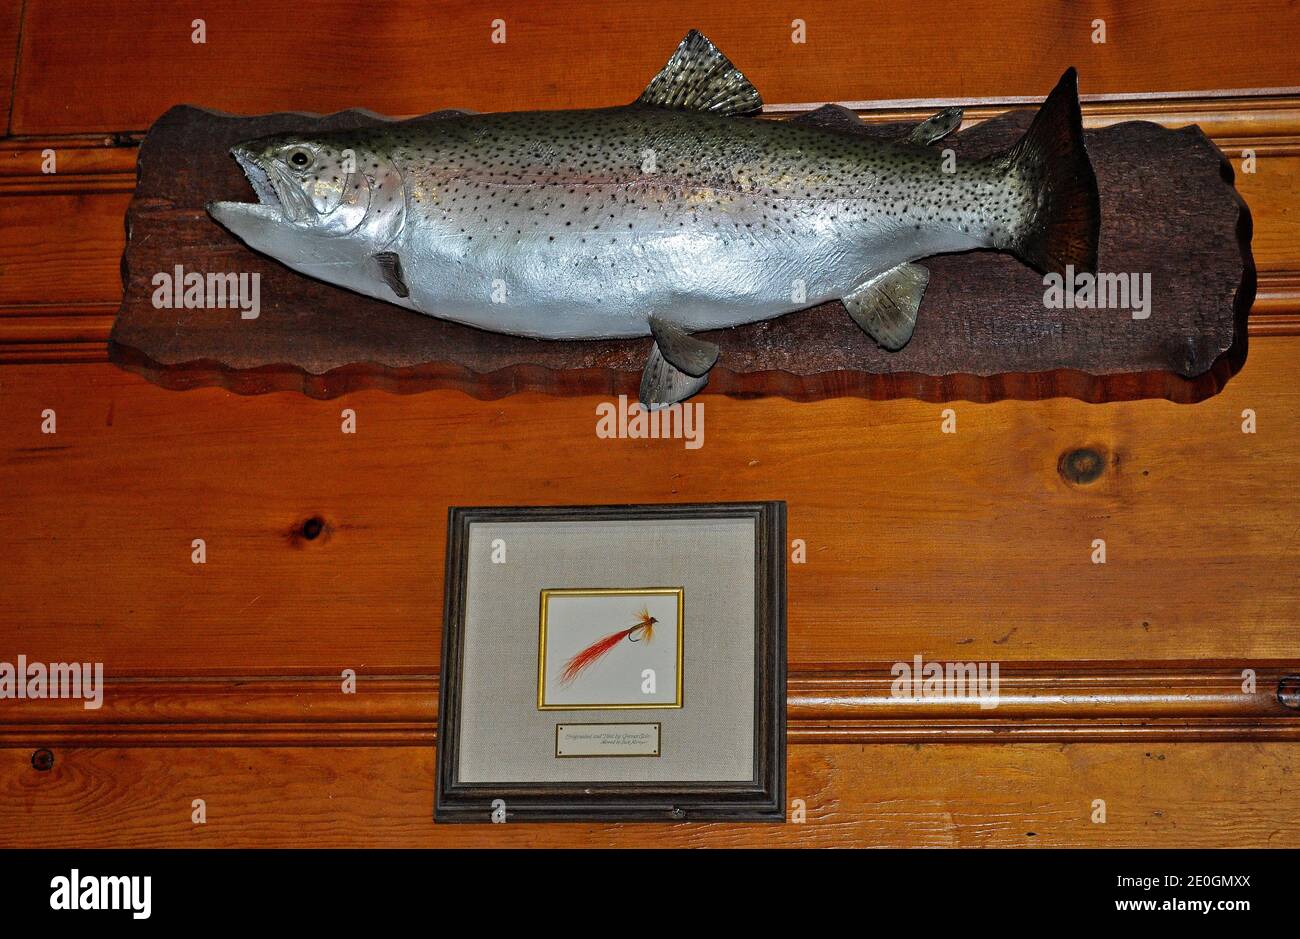 fish and tied fly display on wall of in the Angler's lodge in Golden Gate Park, San Francisco, California Stock Photo